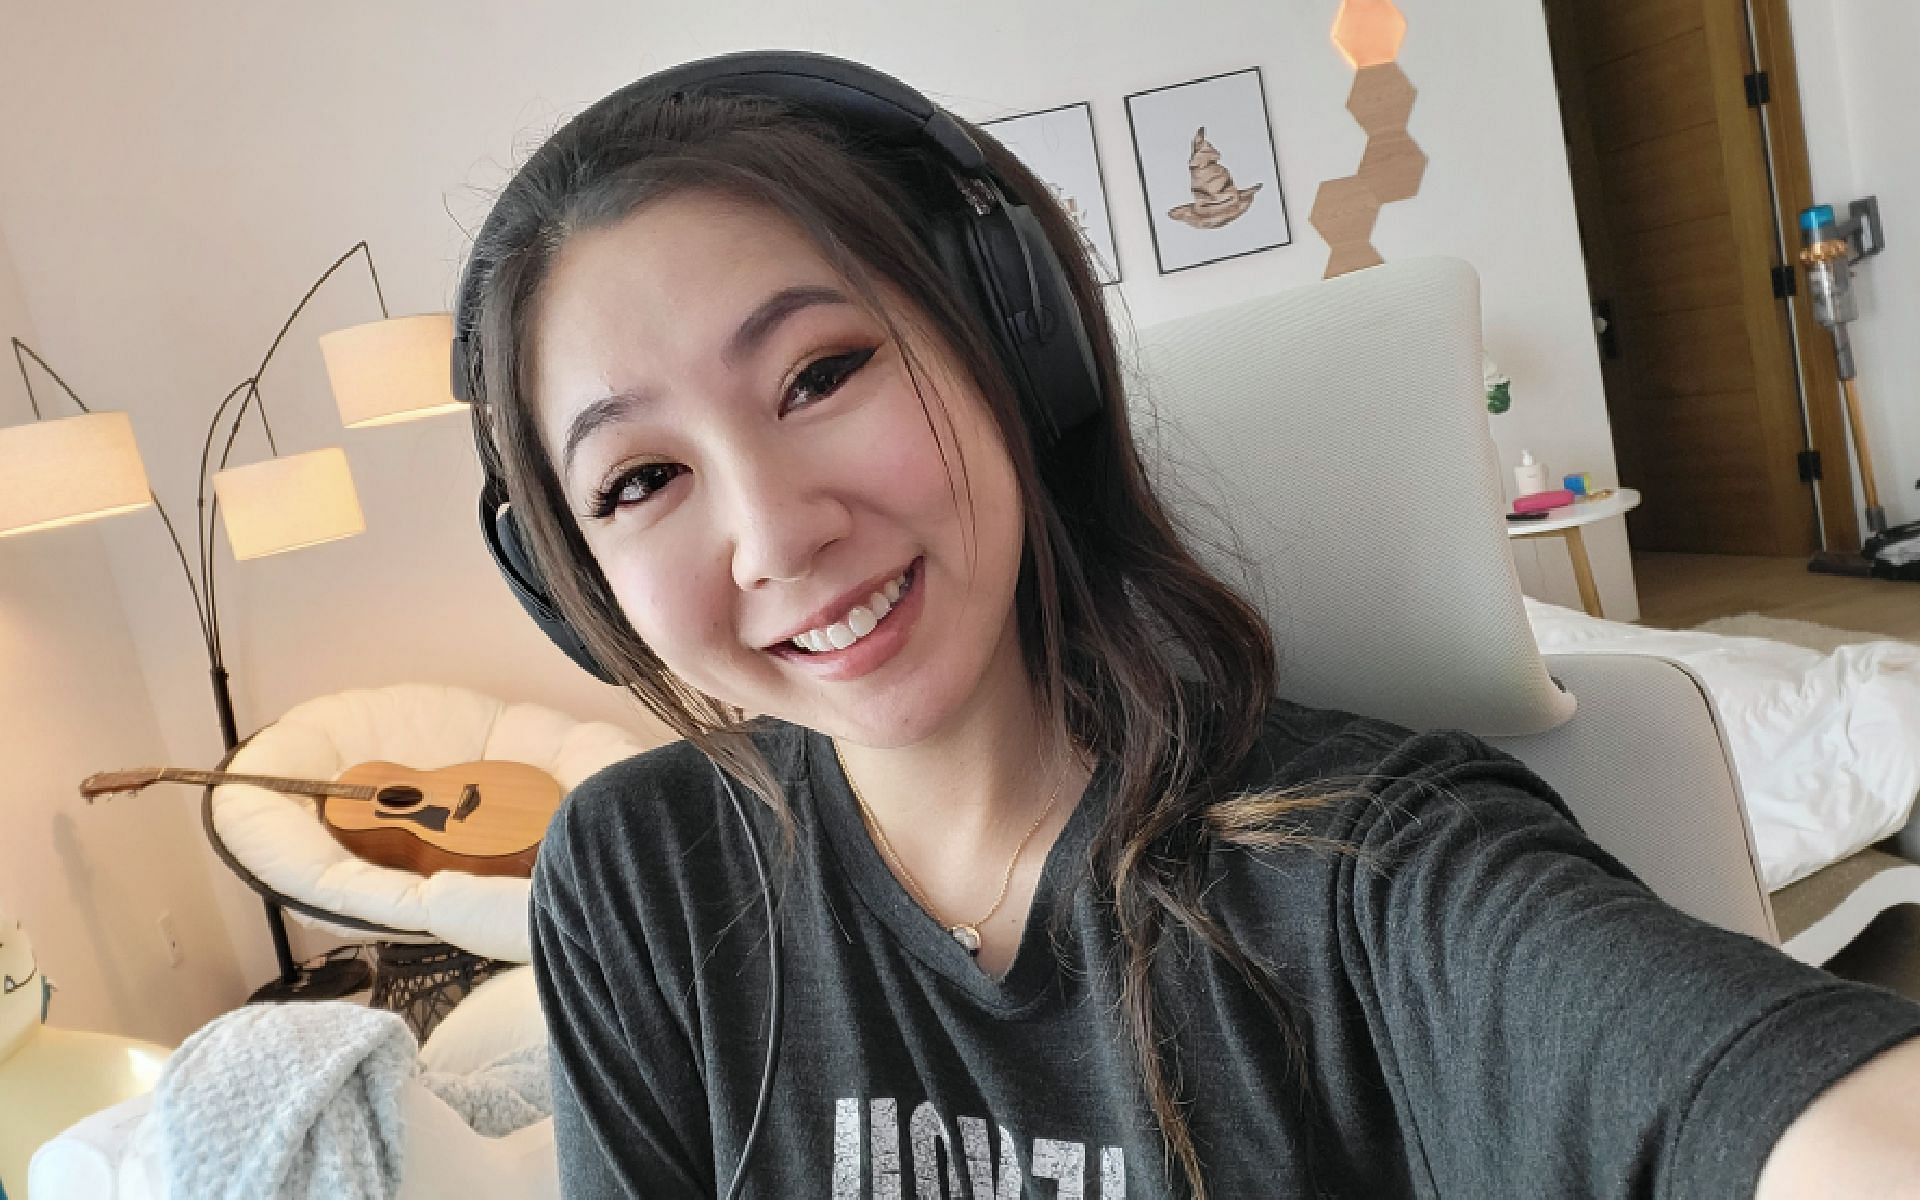 It was copium for me” - Fuslie explains why she baited her audience by hosting her "final Twitch stream" a few days ago